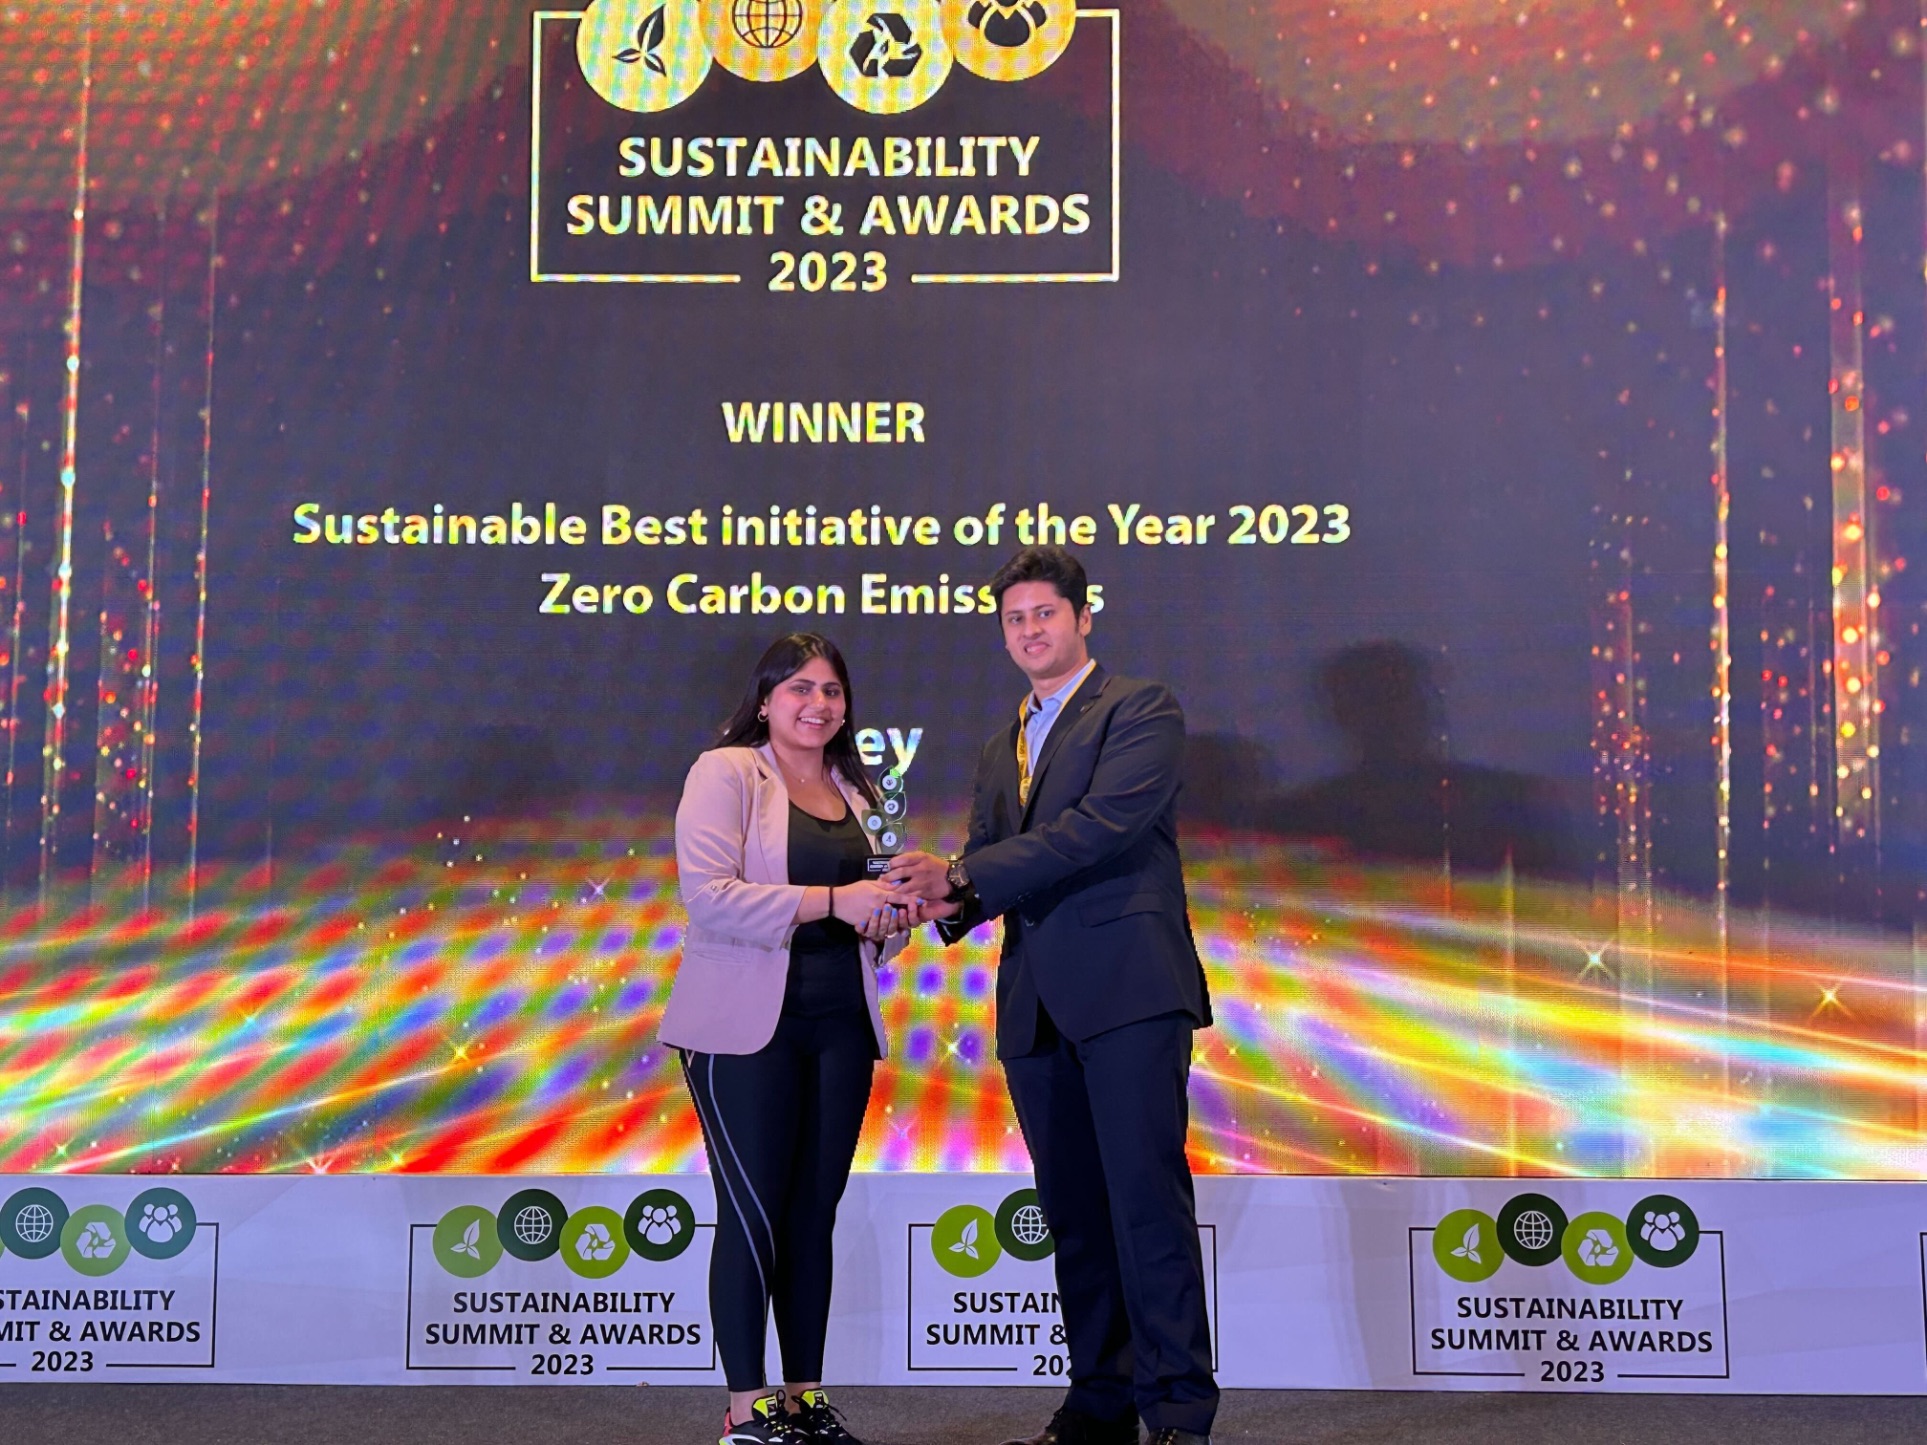 aastey honored with "Sustainable Best Initiative of the Year 2023: Zero Carbon Emissions" Award